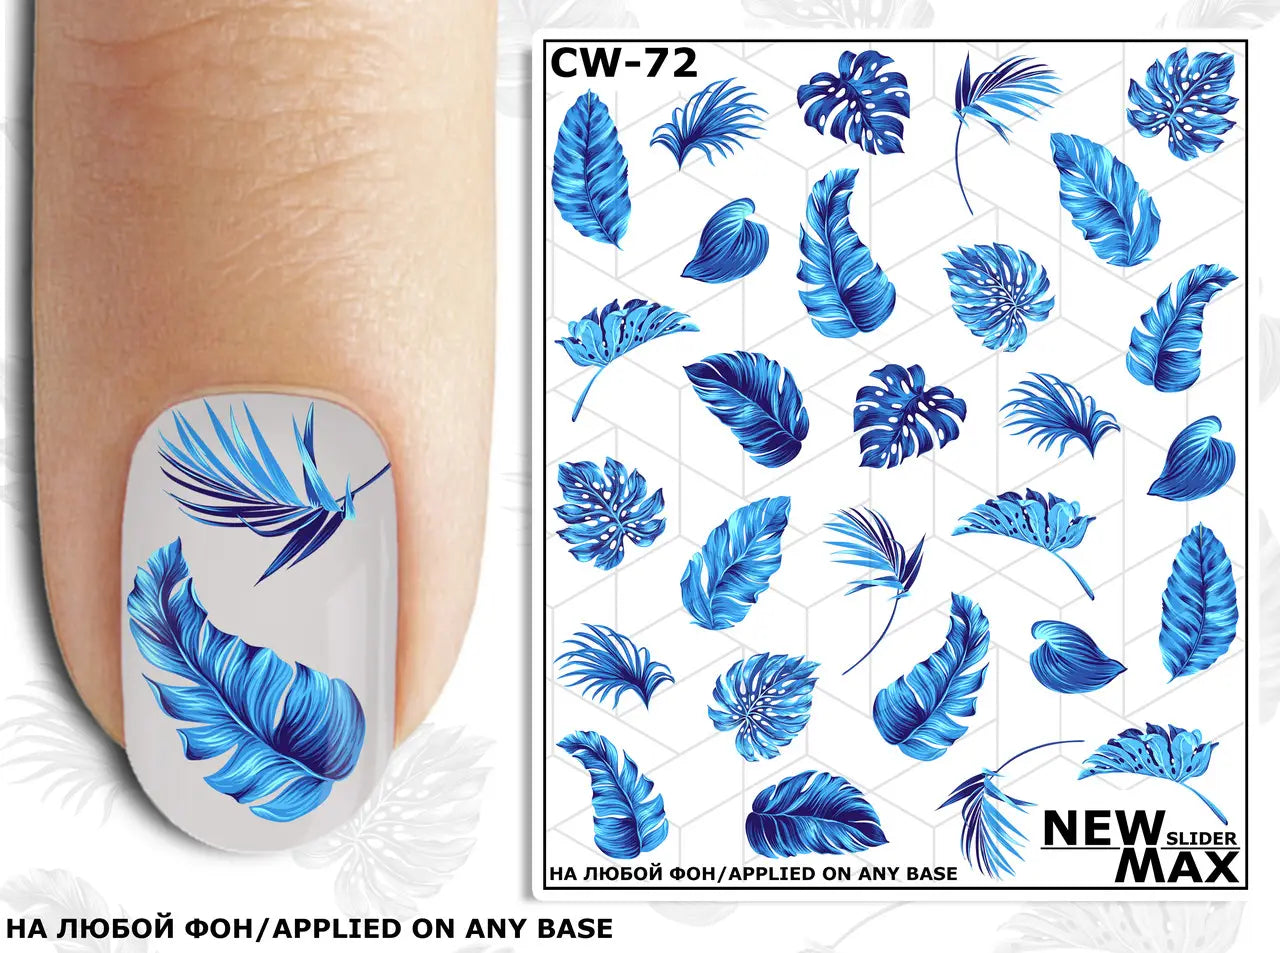 Newmaxpro Slider design for Manicure CW-72